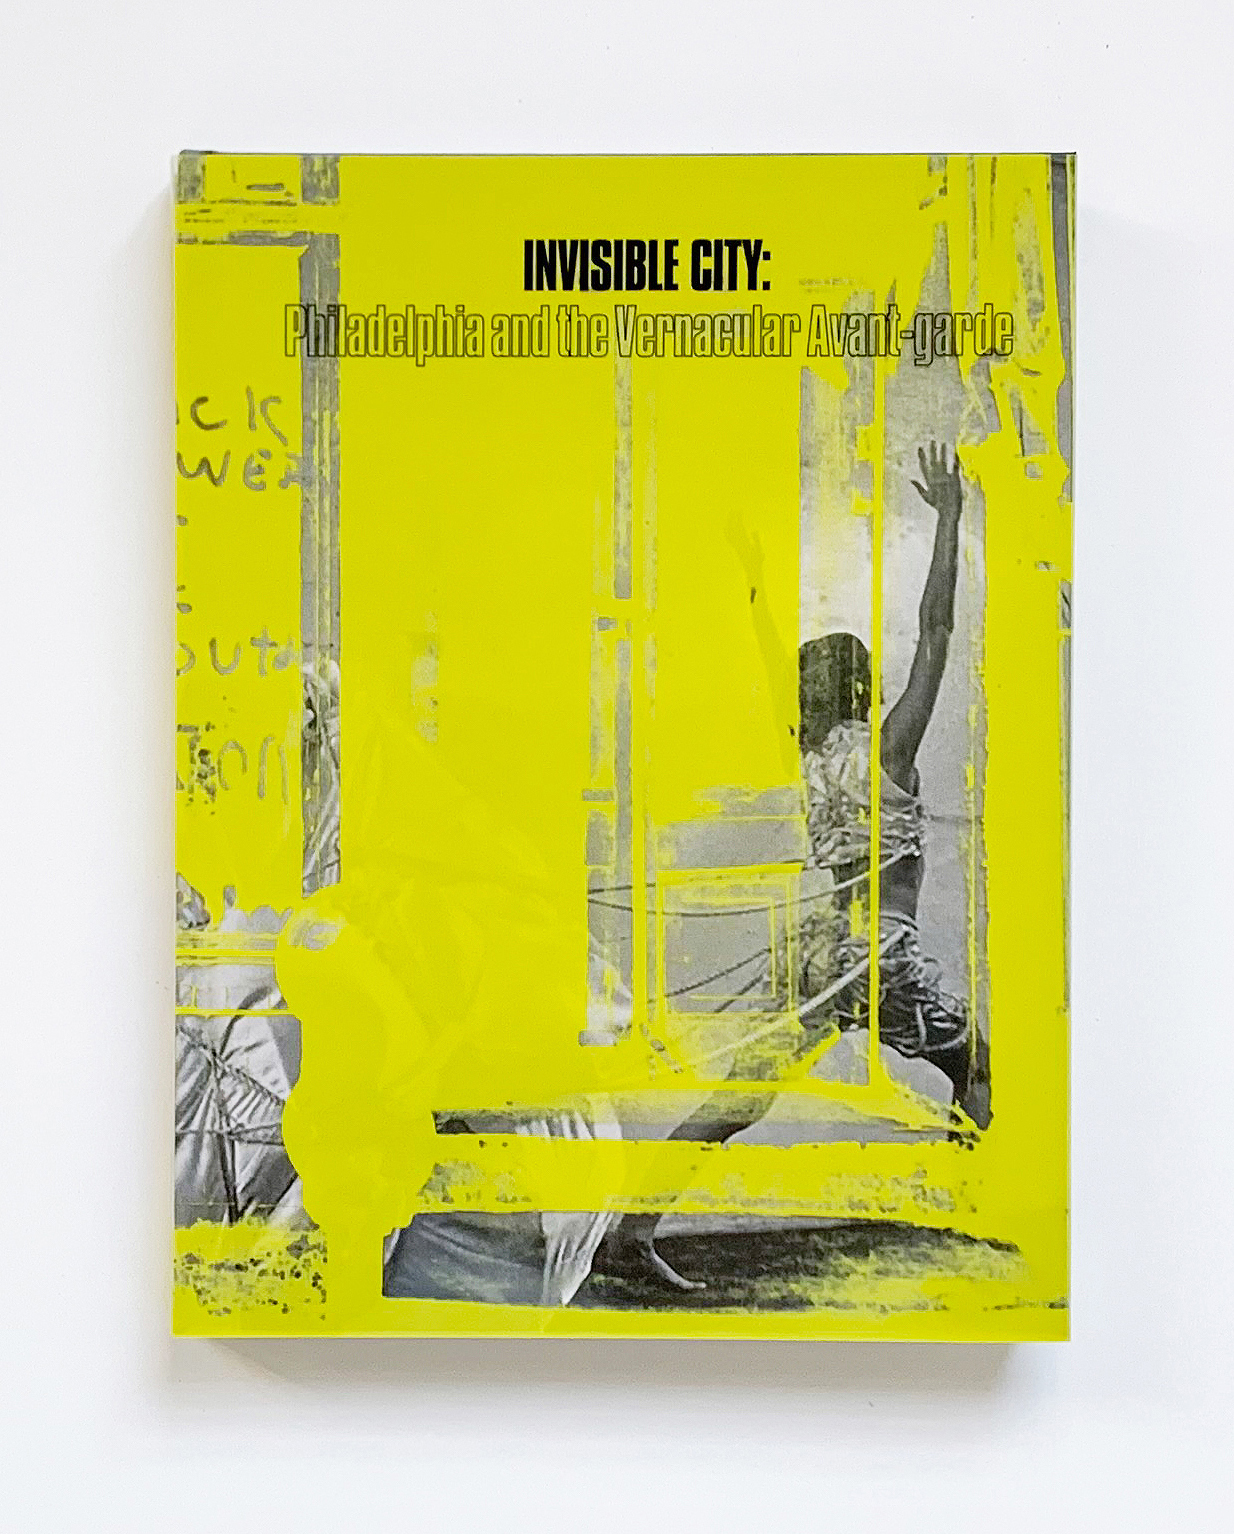 Invisible City catalog cover with neon yellow overlay